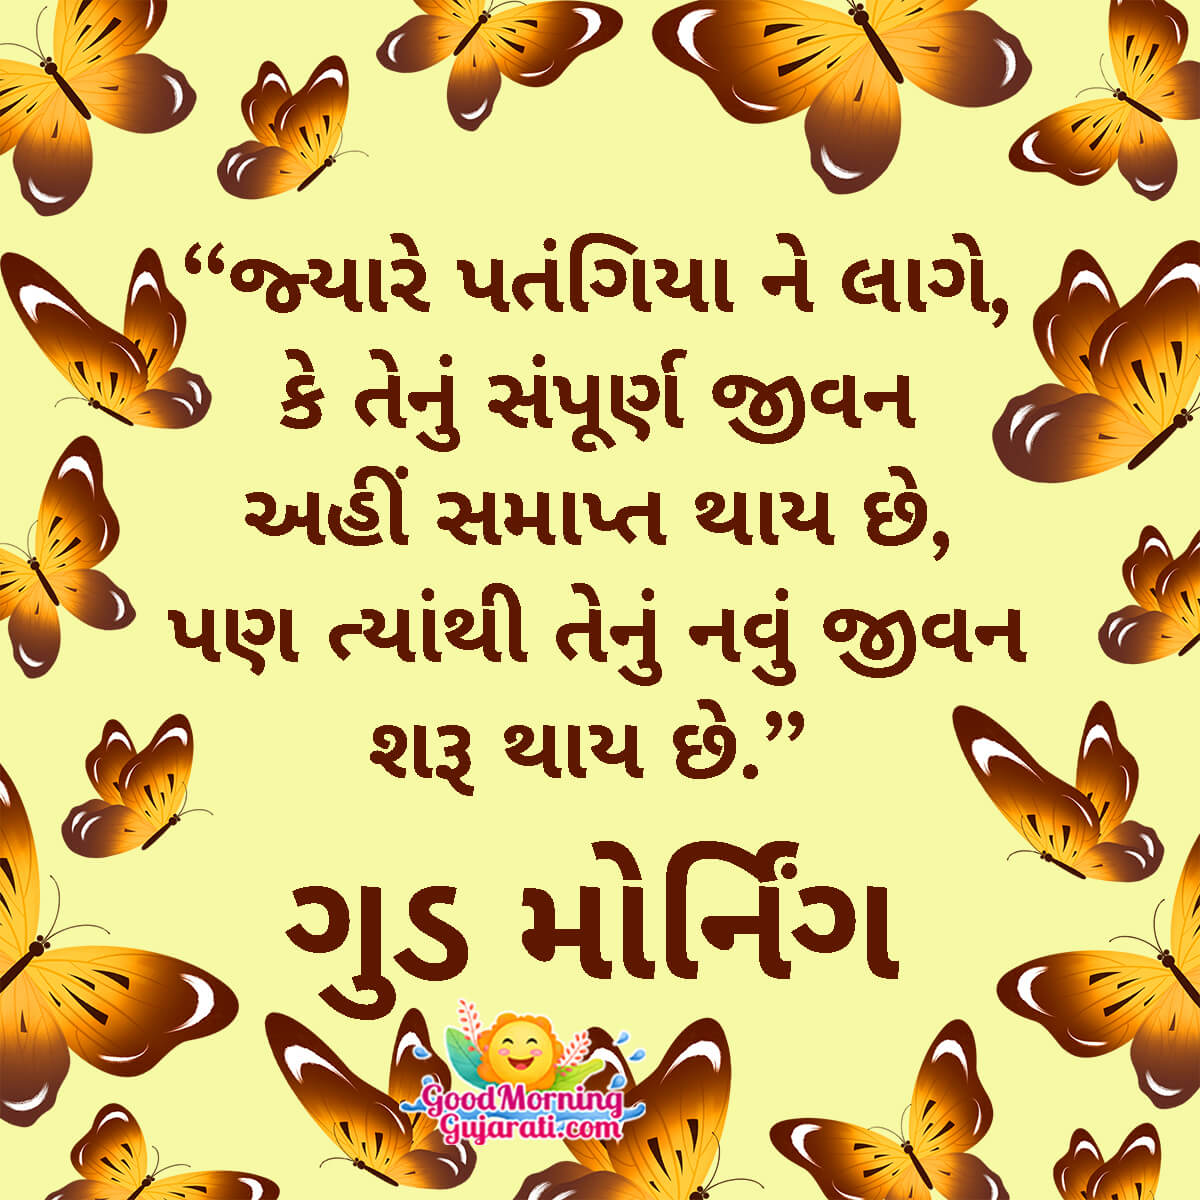 Good Morning Butterfly Quotes in Gujarati